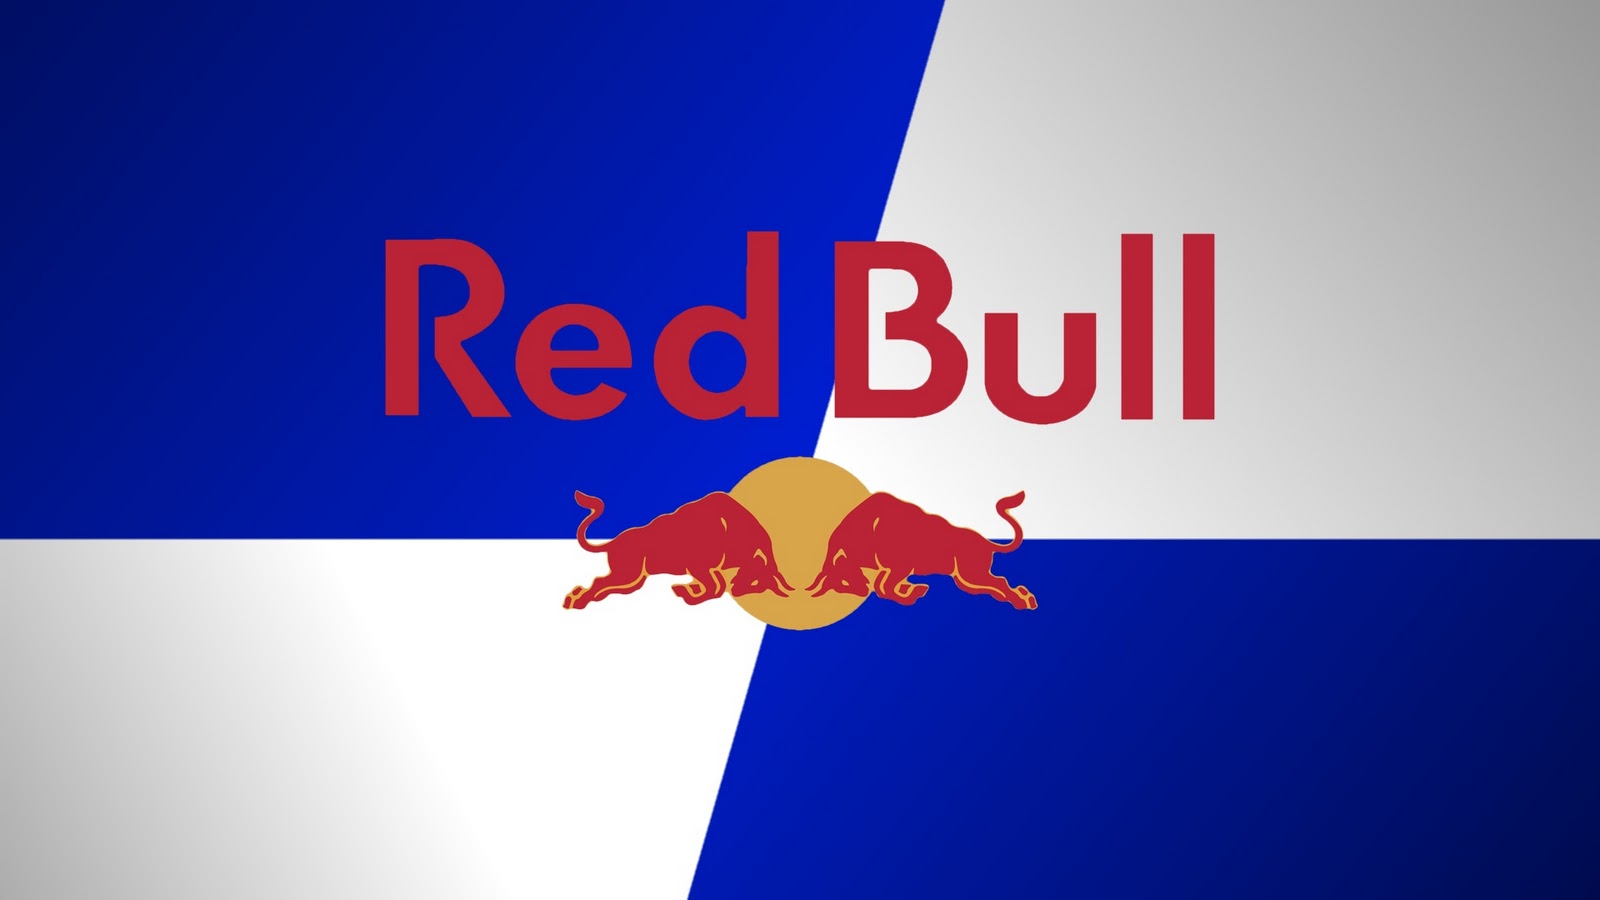 Quot Red Bull Does Not Give You Wings To Pay